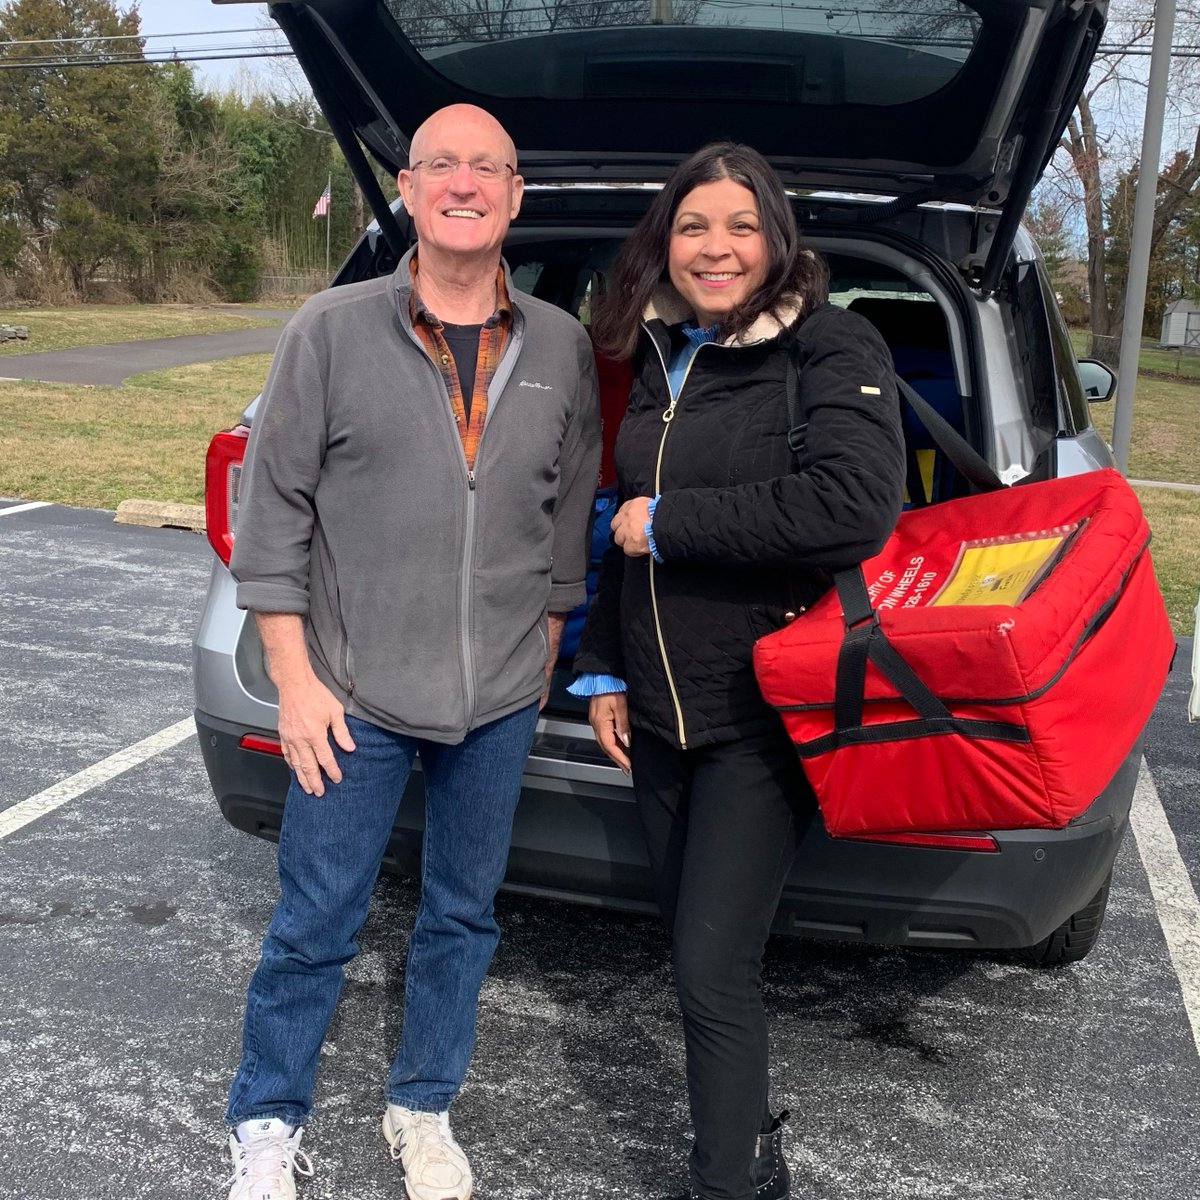 Many thanks to @RepJoeWebster for joining our Meals on Wheels program earlier this month in celebration of March for Meals.

#MealsOnWheels #MoreThanAMeal #MarchForMeals #NeighborsHelpingNeighbors #StrongerTogether #MontCoPA